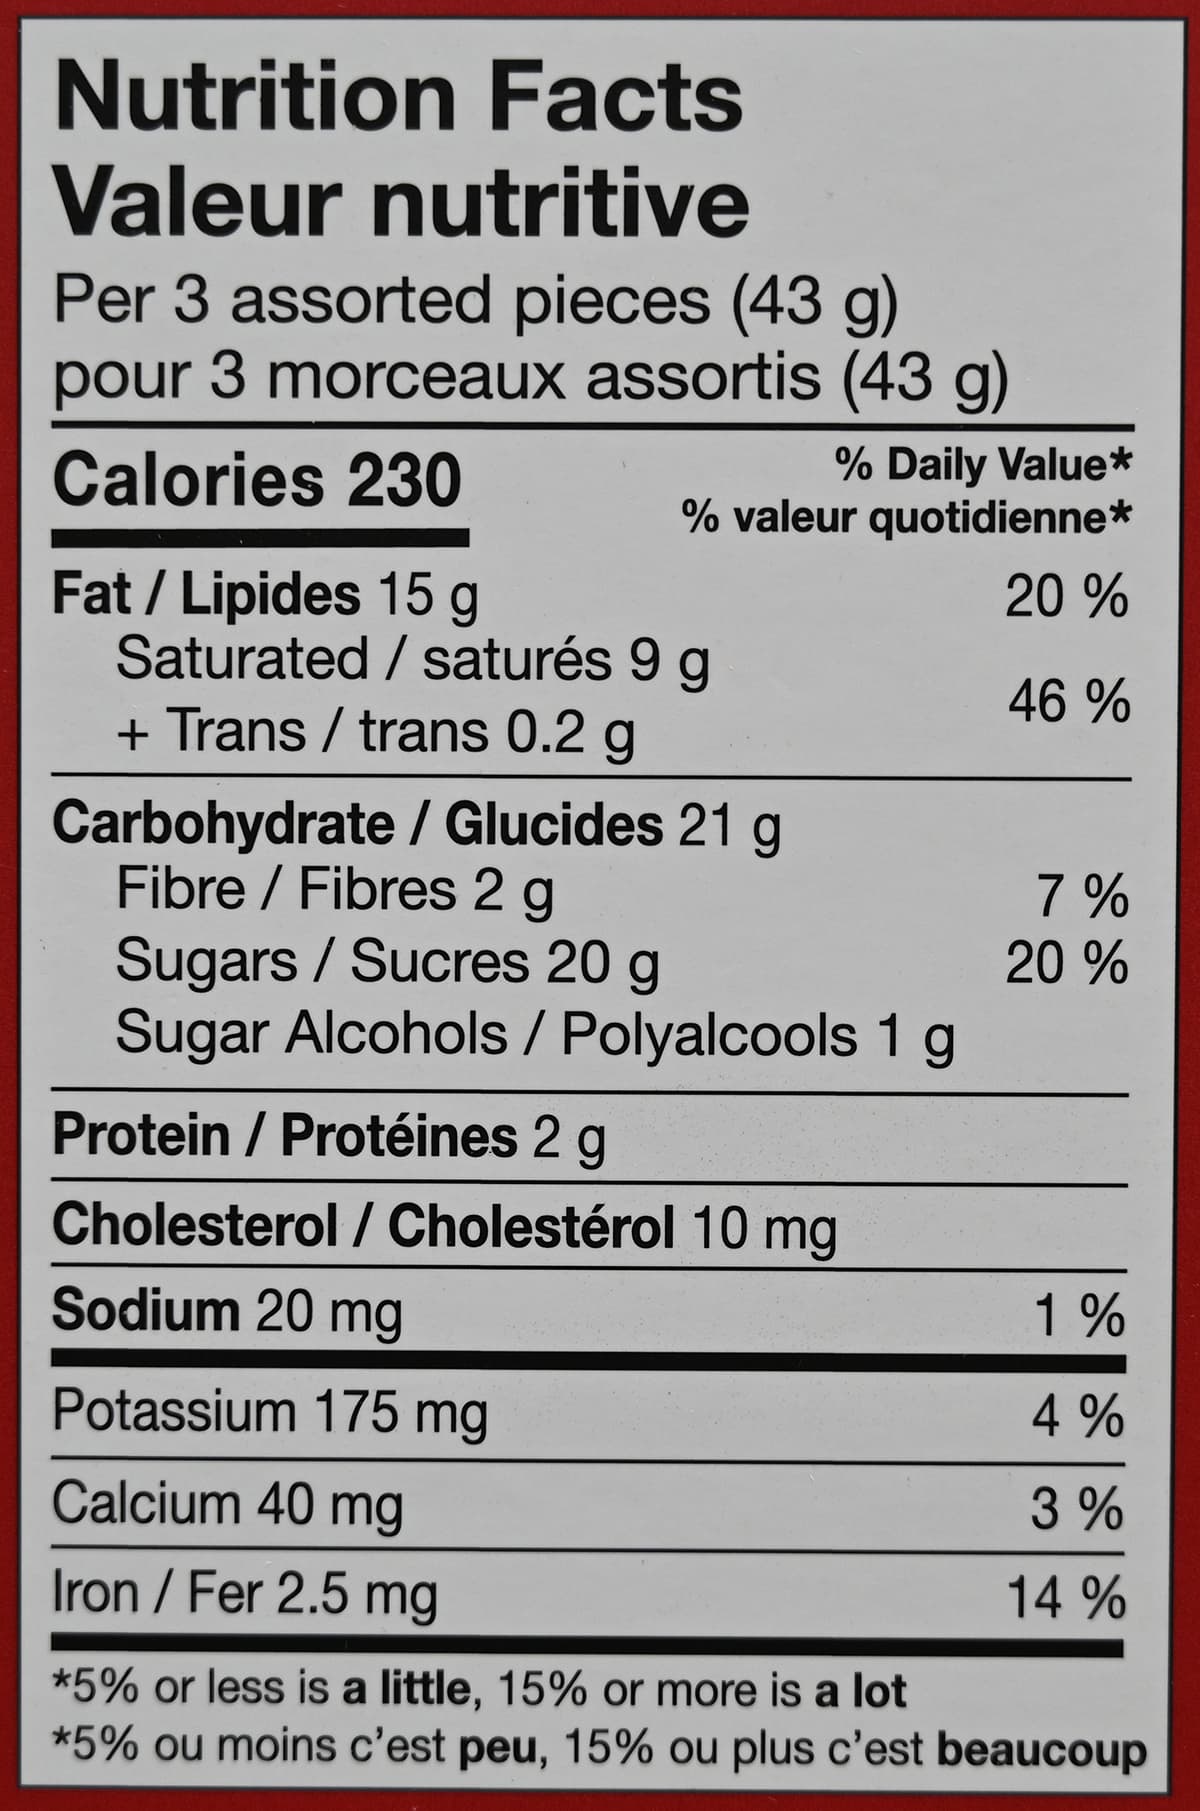 Image of the nutrition facts for the chocolates from the back of the box.